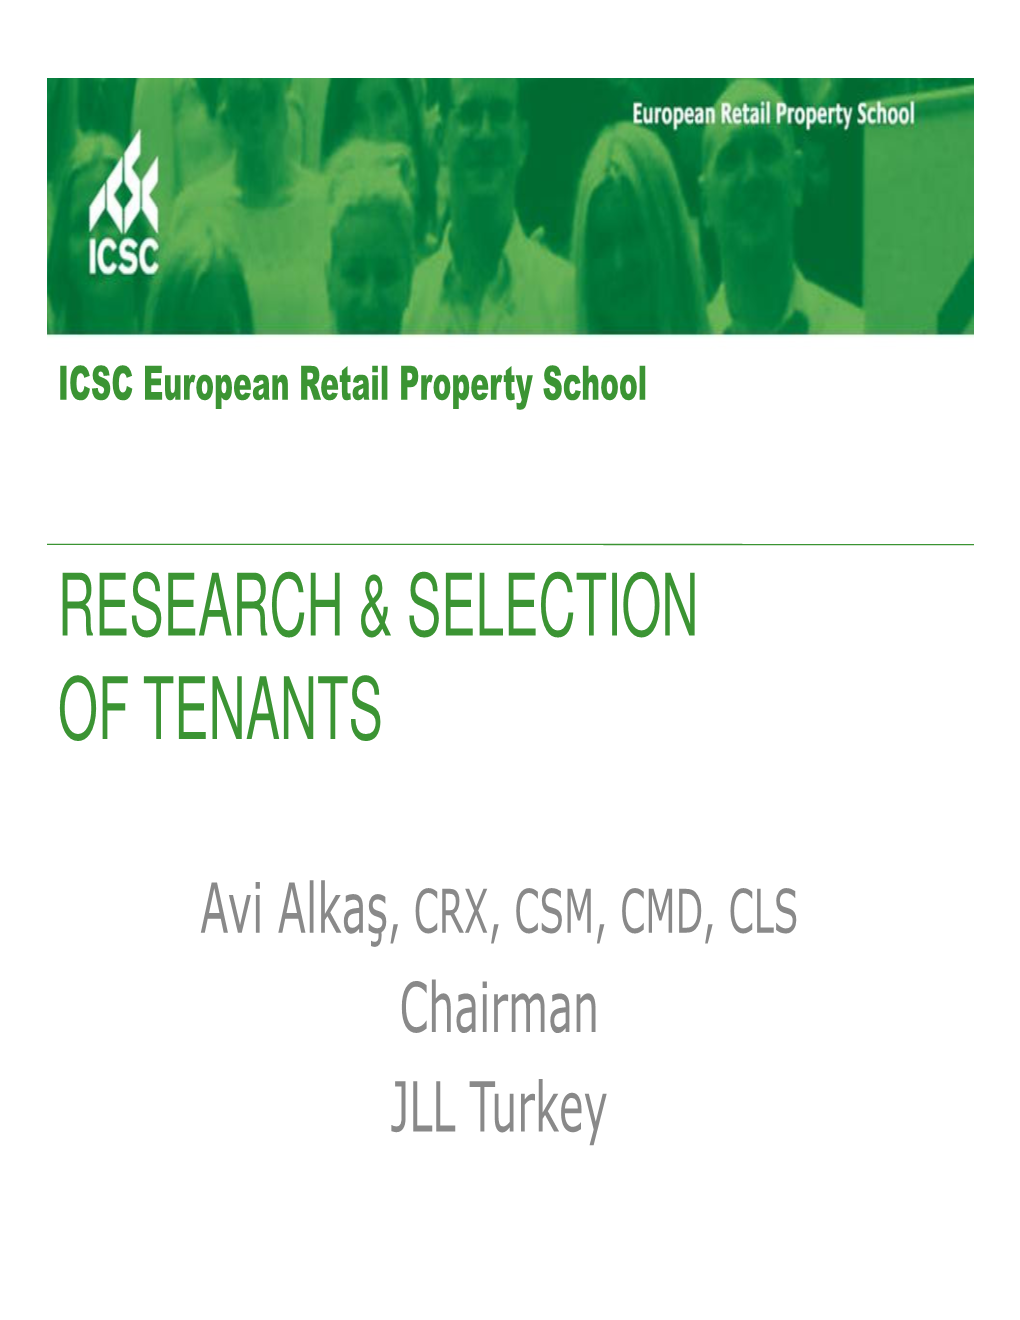 Research & Selection of Tenants